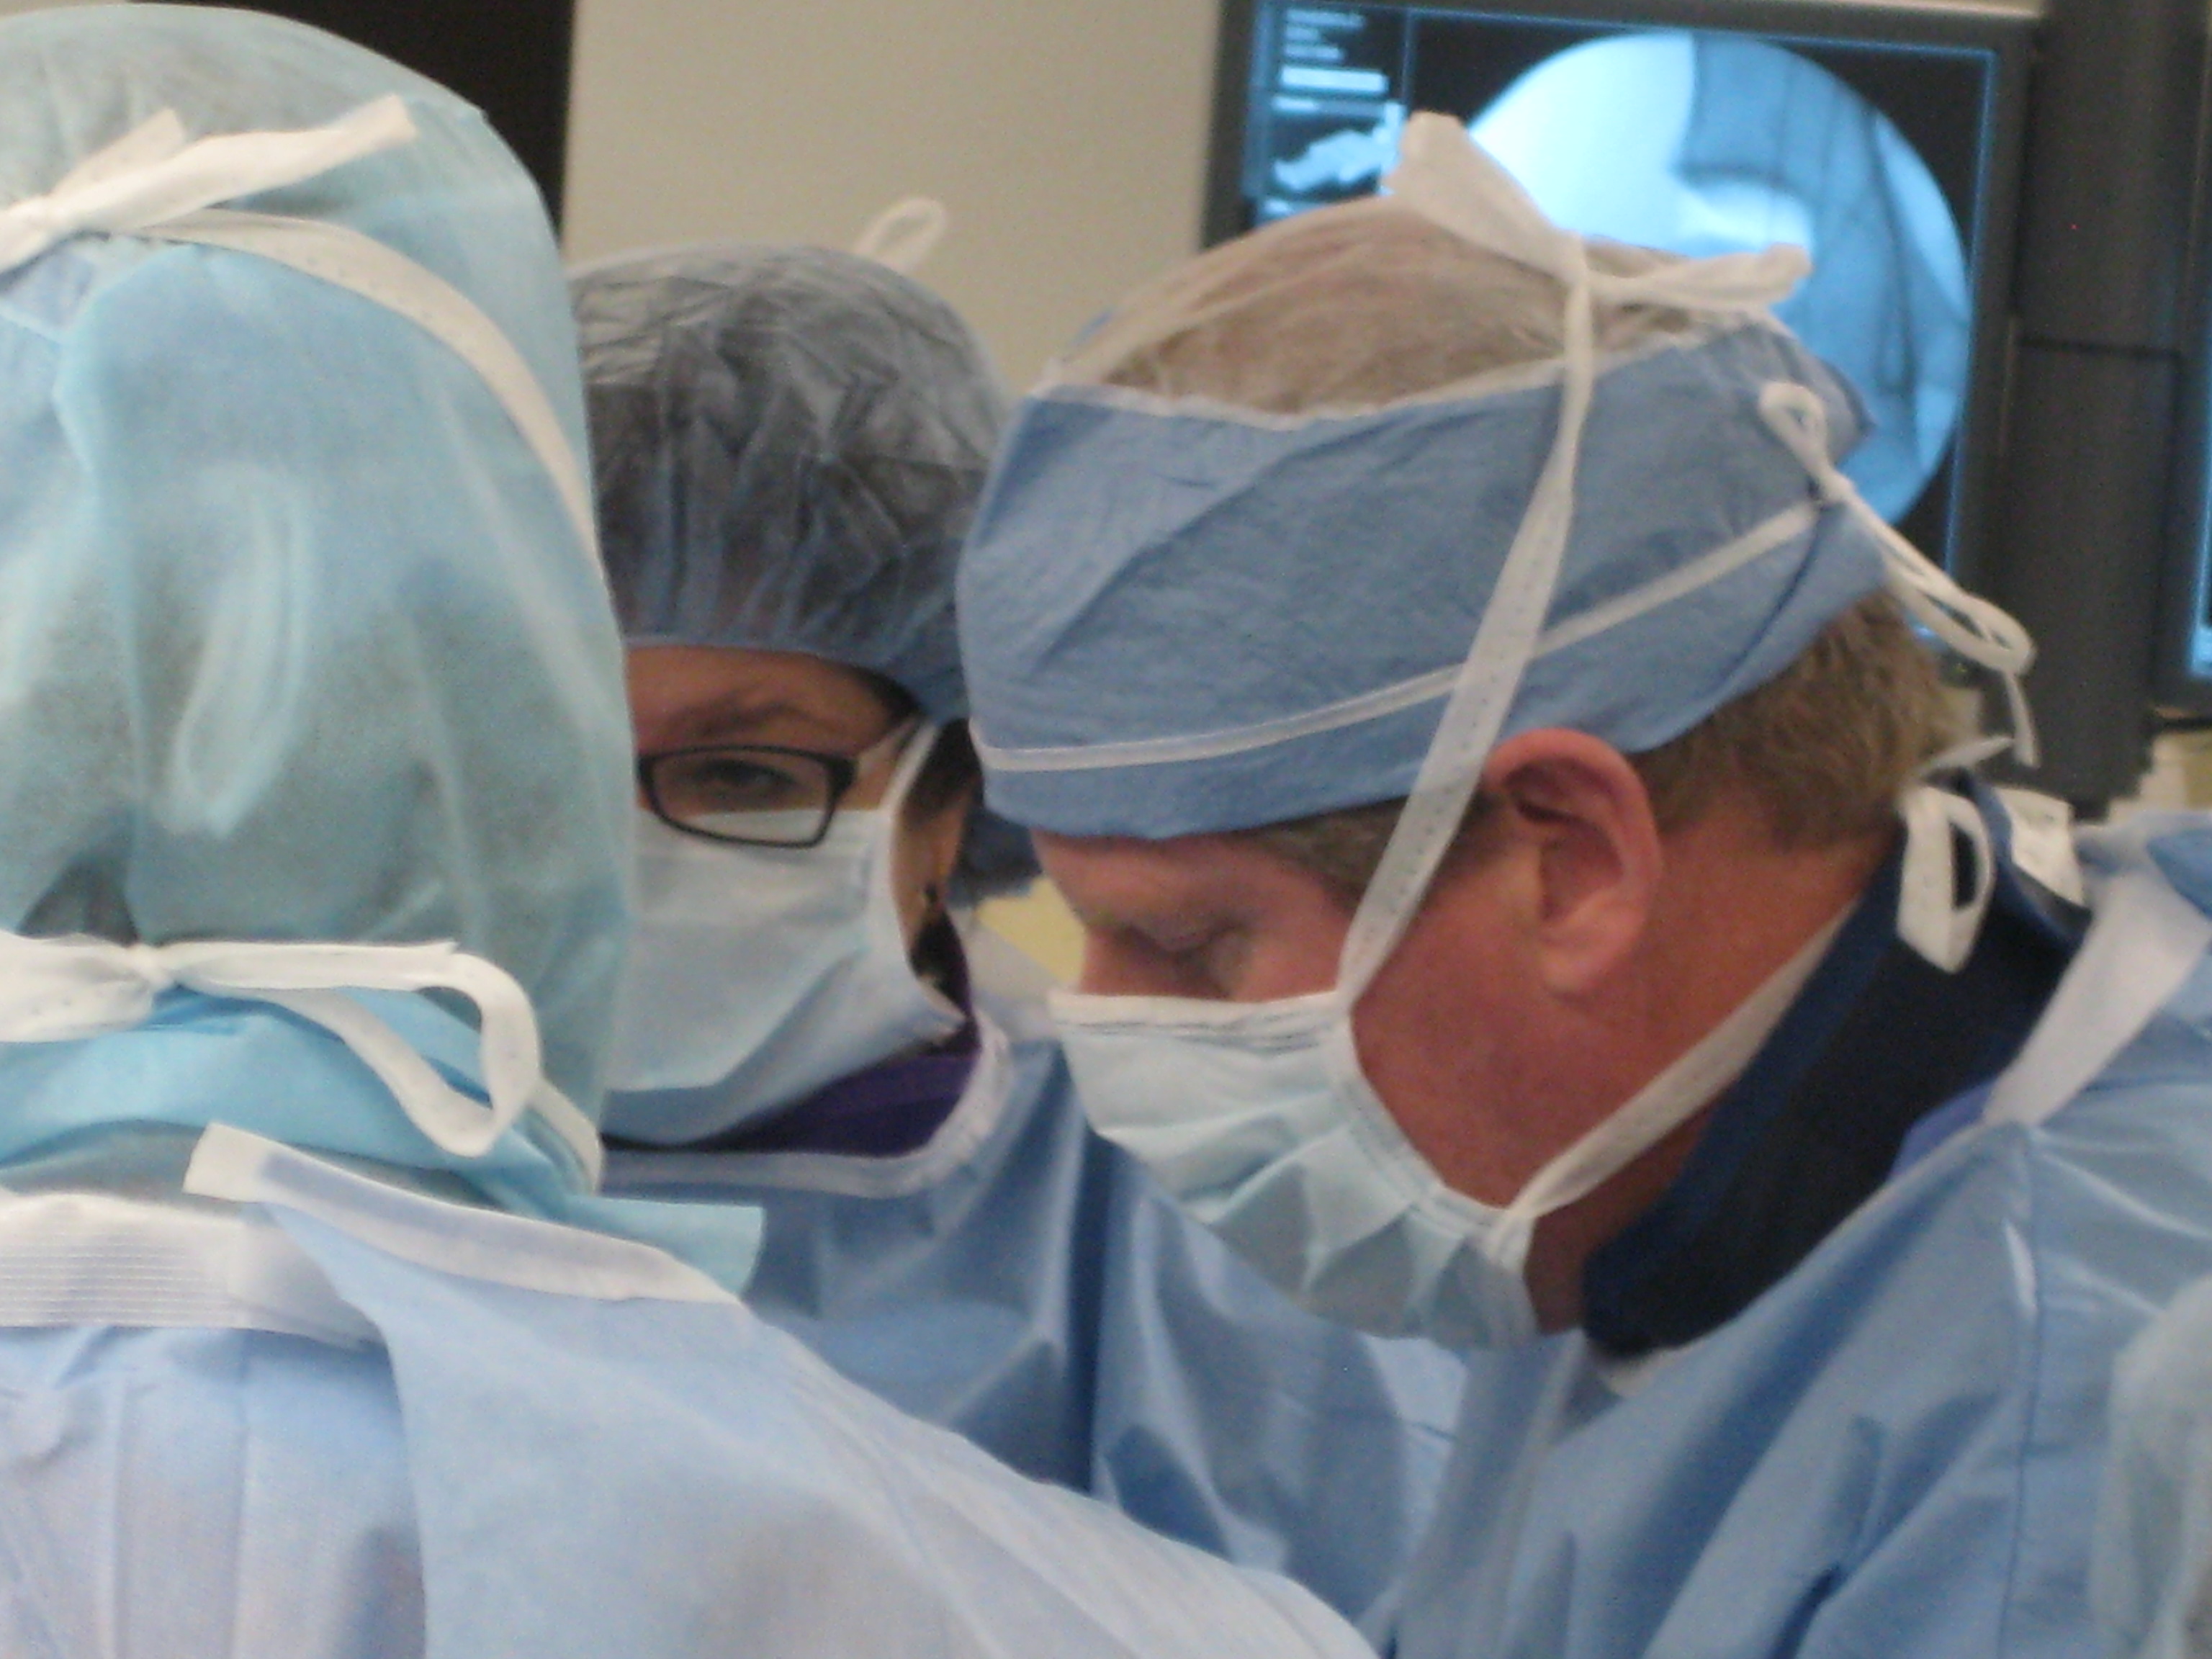 Outpatient Hip Replacement and Hip Arthroscopy Now Being Performed in Orchard Park